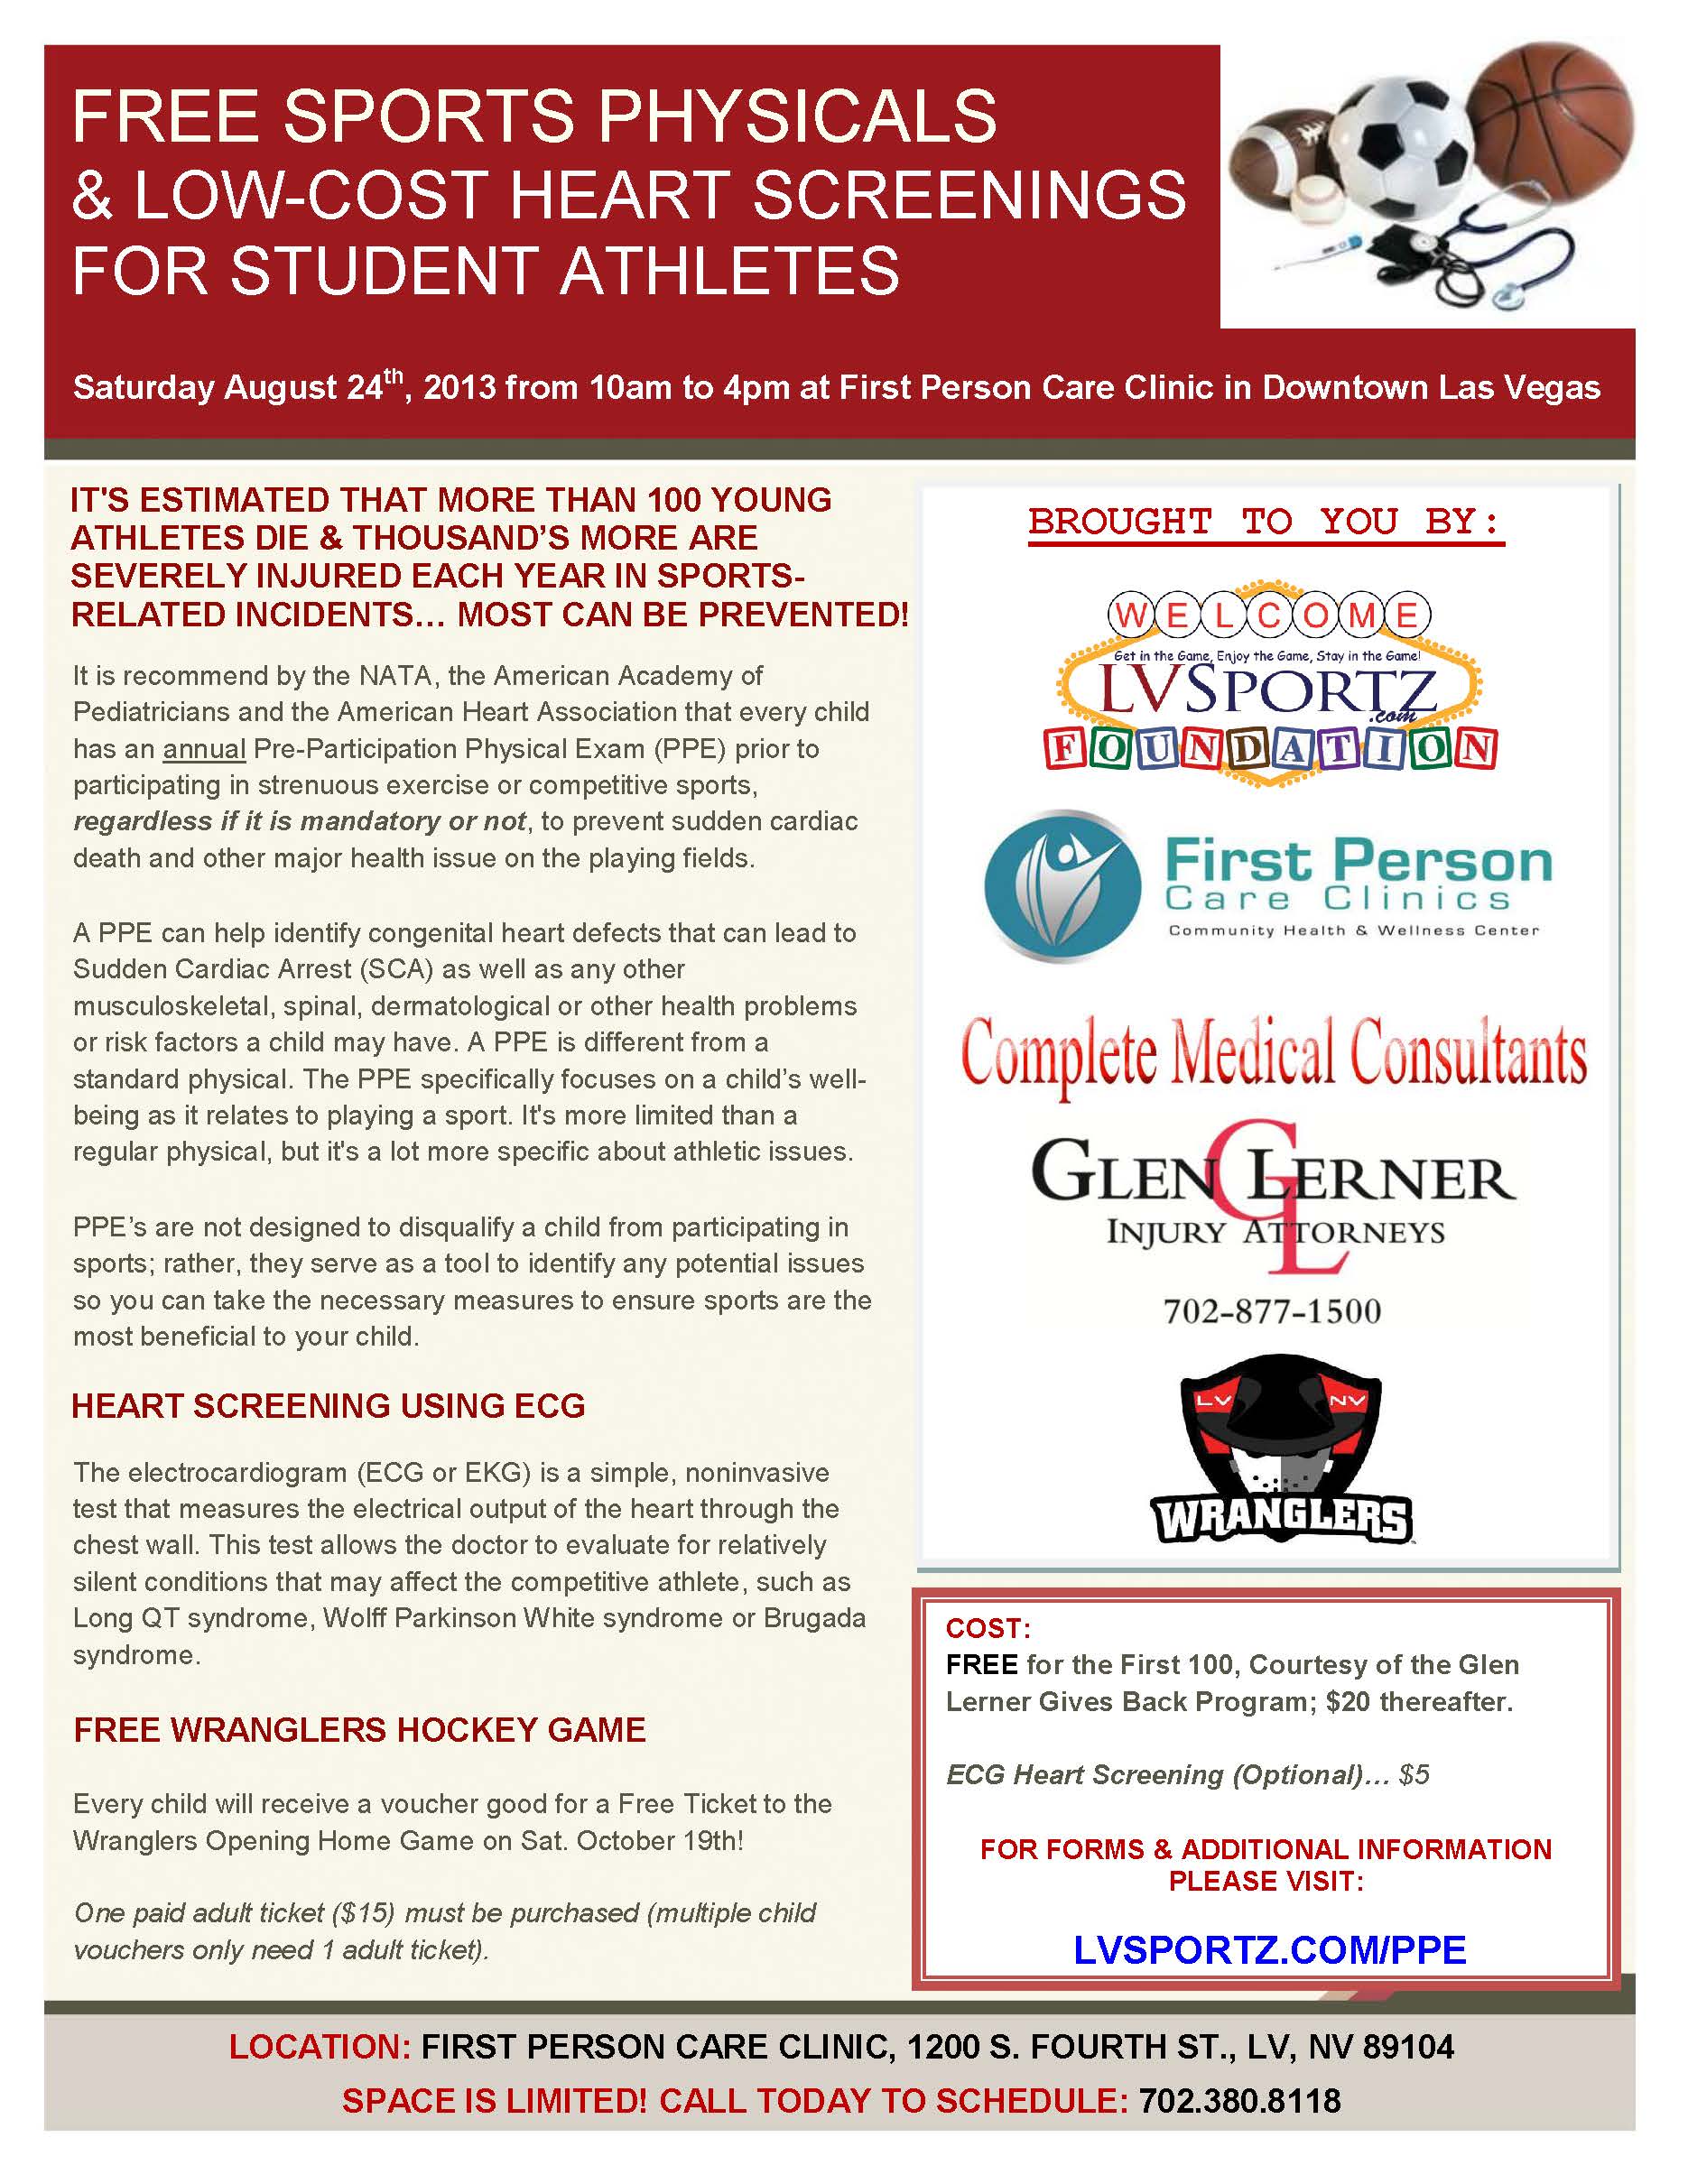 FREE Sports Physicals for first 100 athletes, courtesy of Glen Lerner Injury Attorneys.